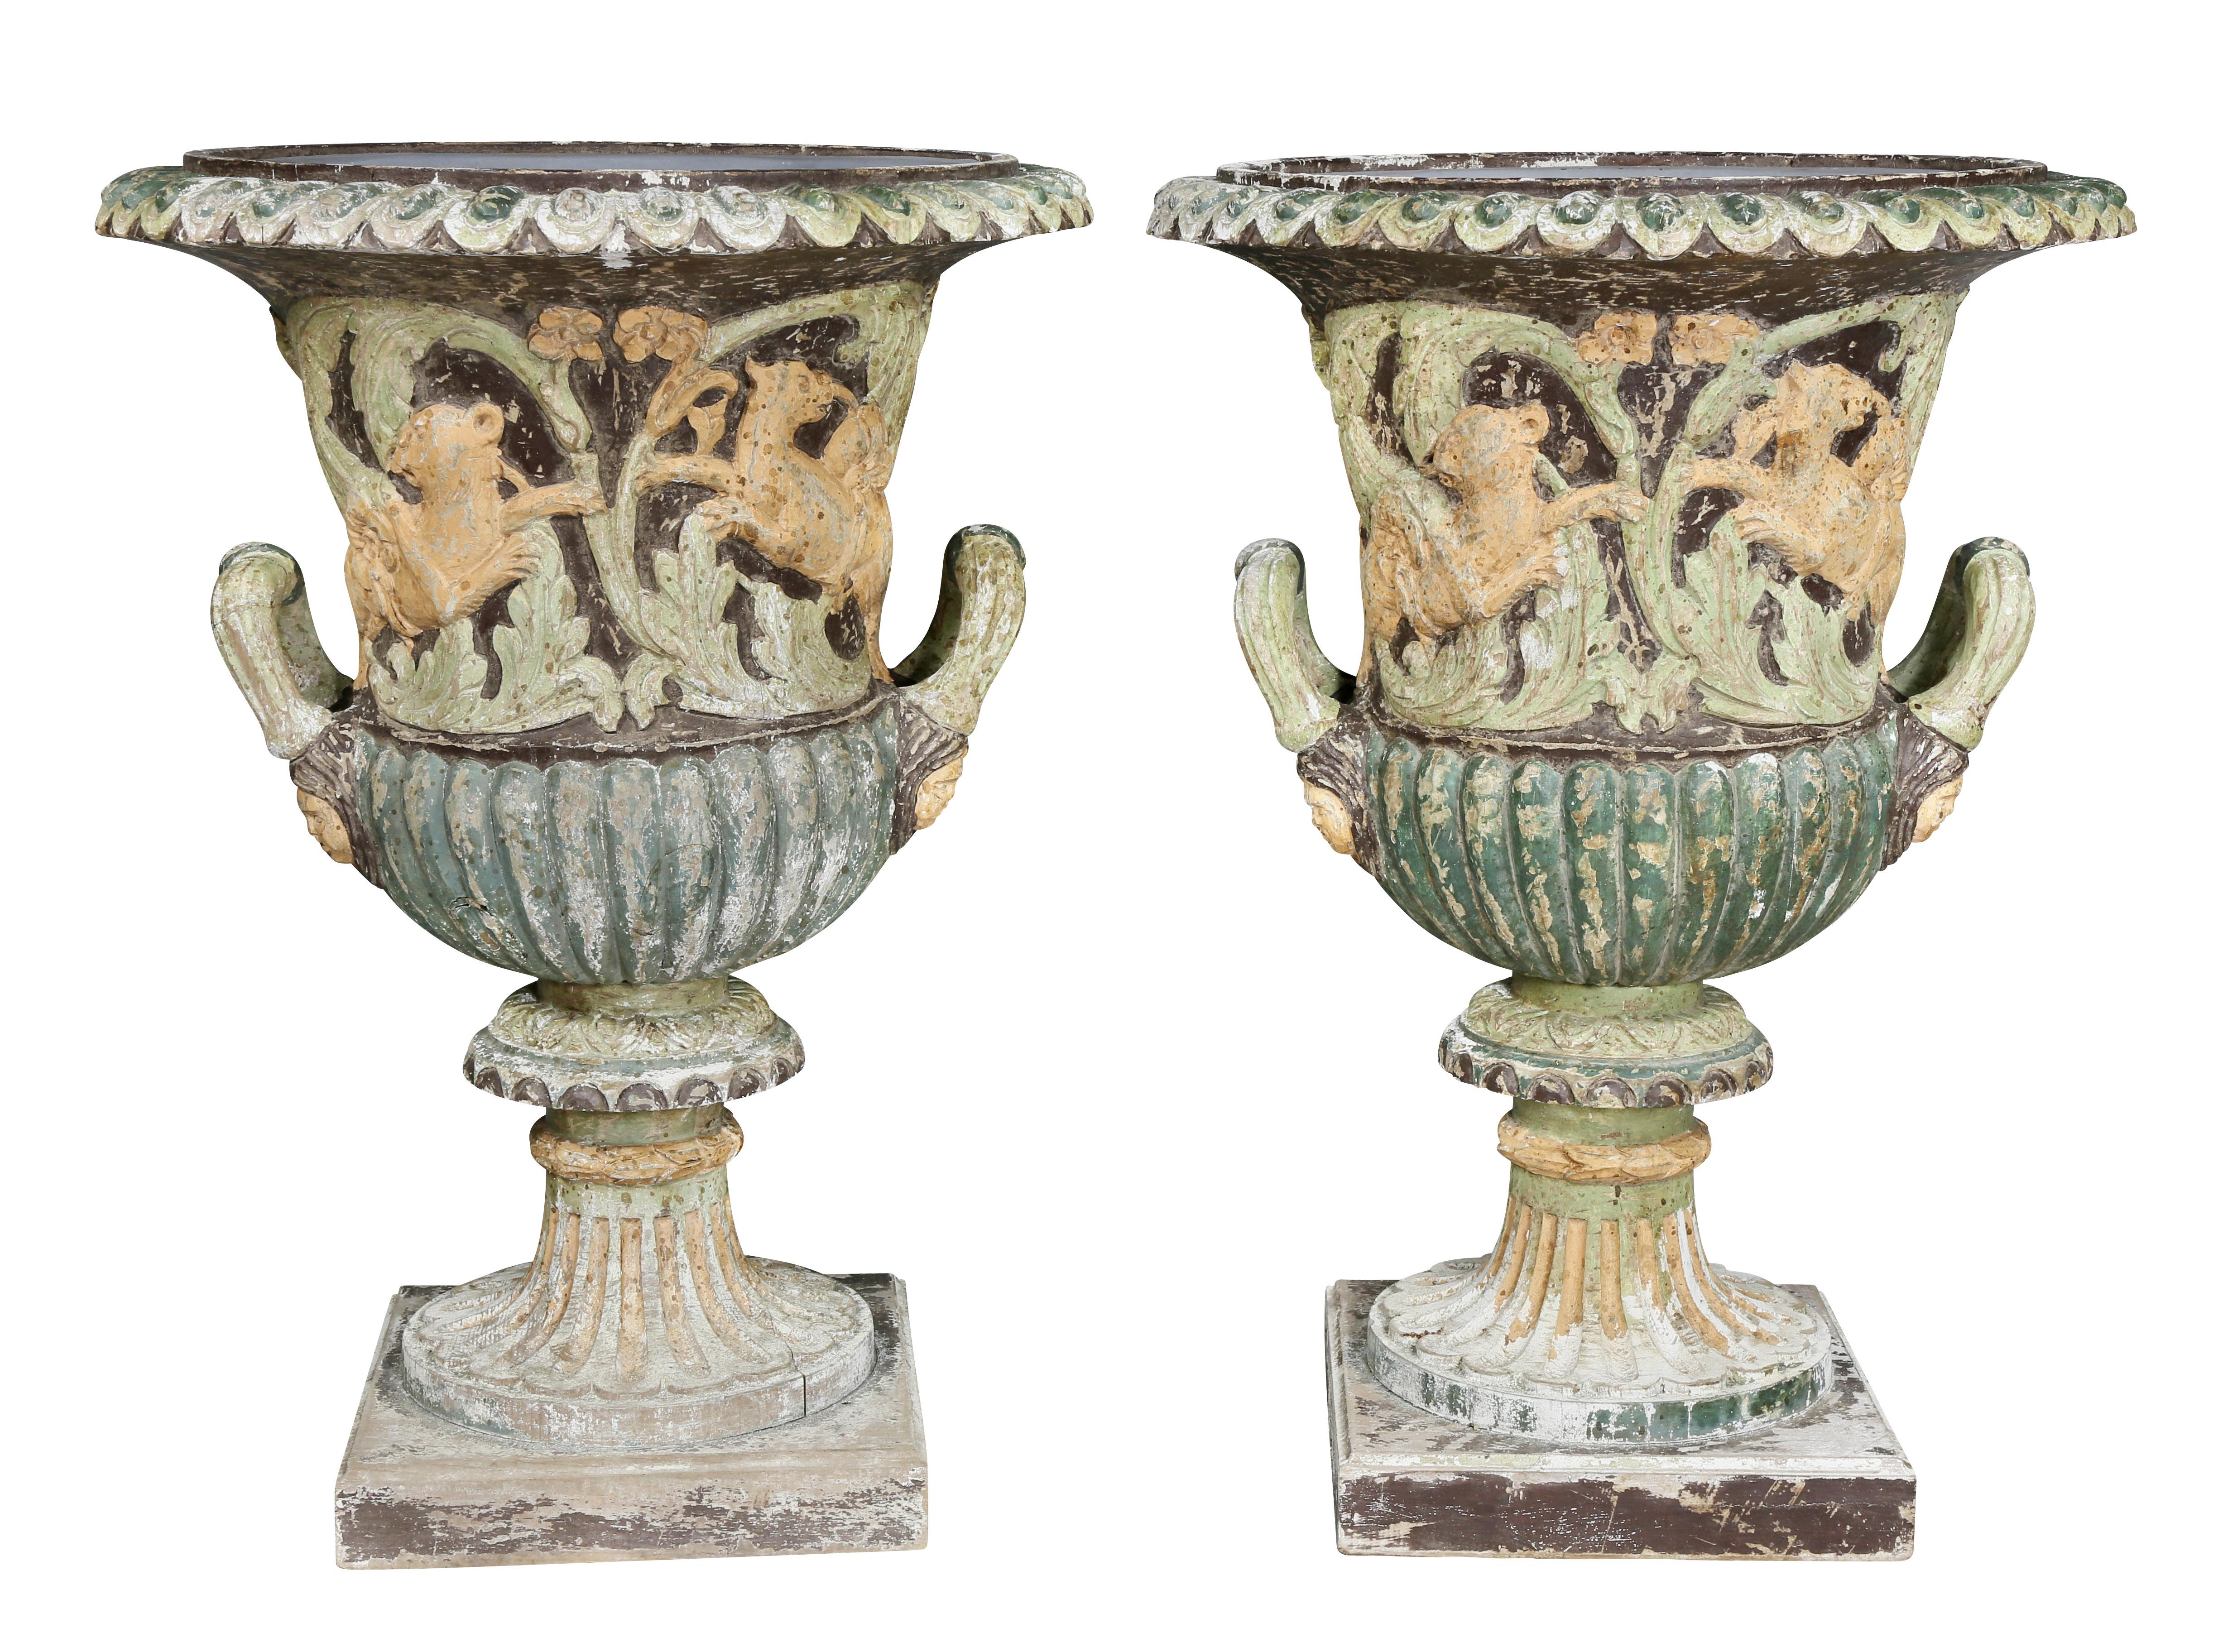 Each with lions and foliage with two handles and square base. Provenance; Estate Of Michael D. Dingman.